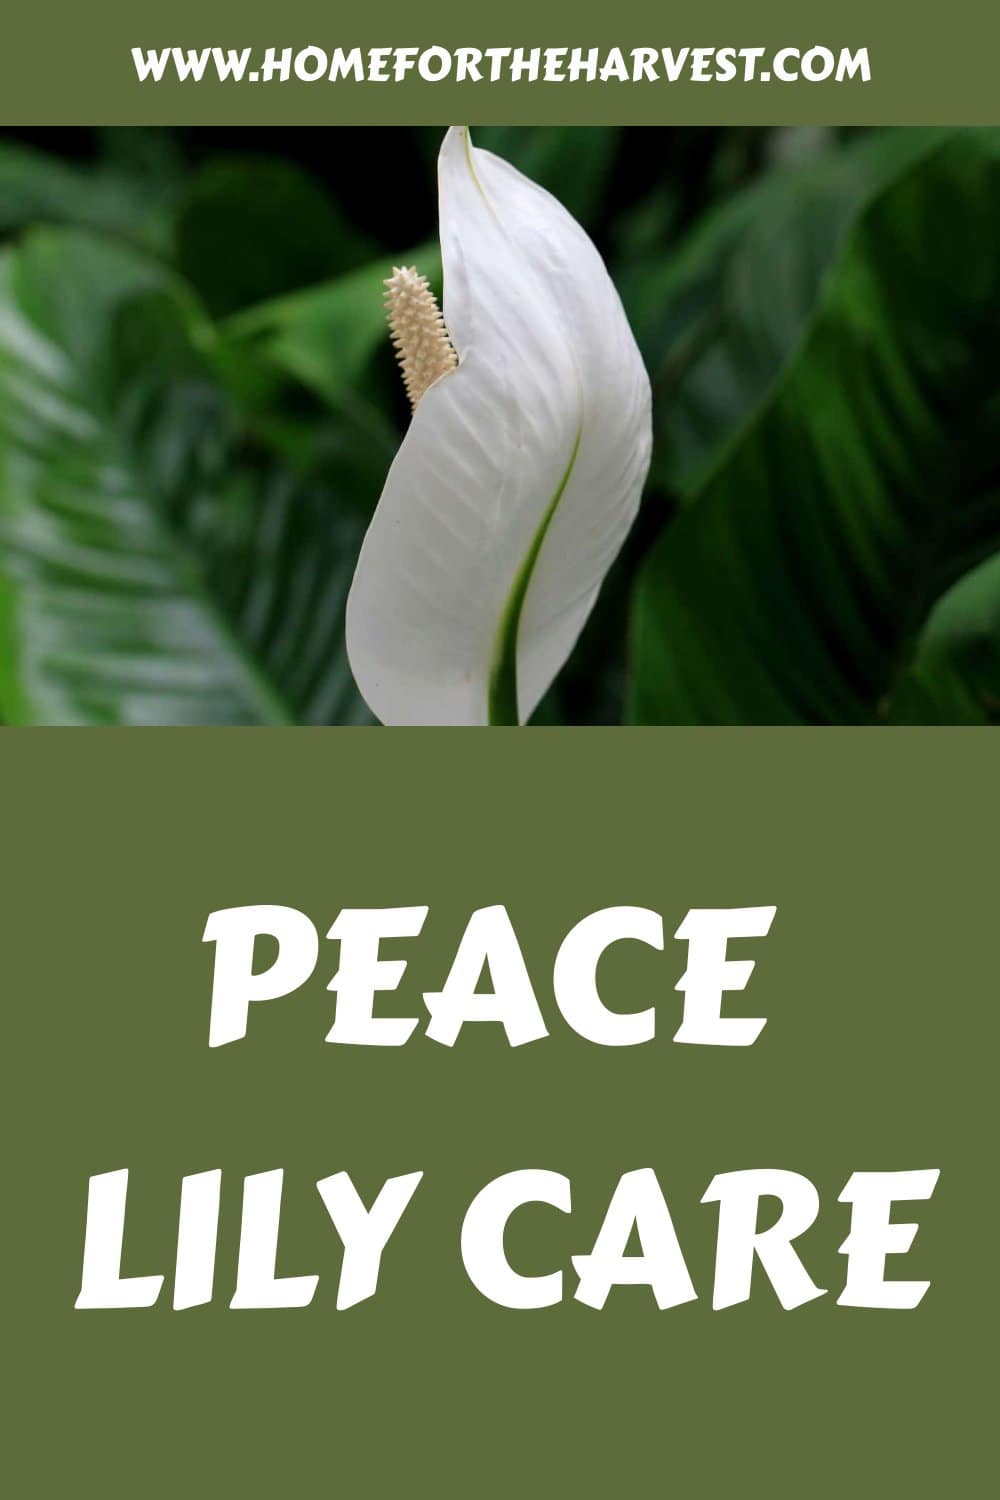 Peace lily care generated pin 52305